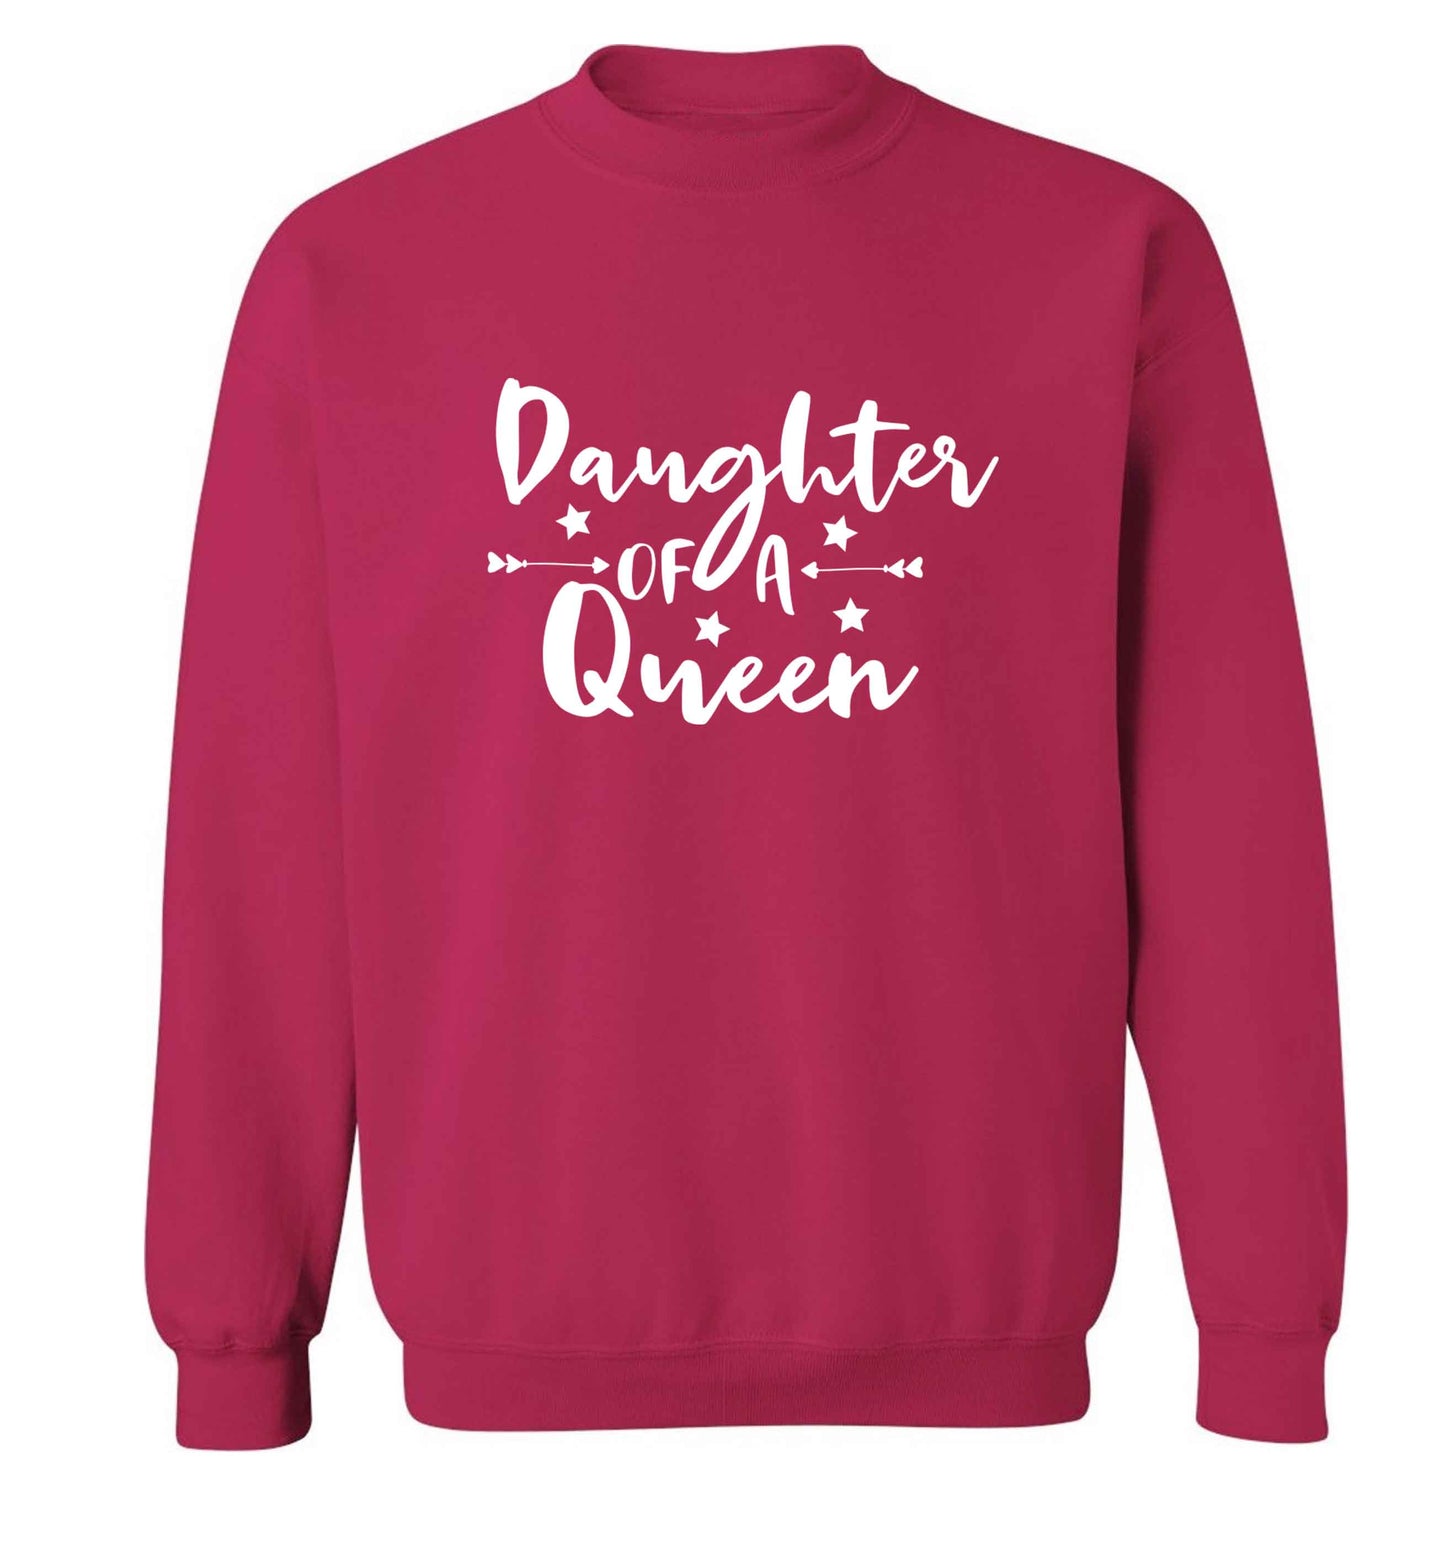 Daughter of a Queen adult's unisex pink sweater 2XL